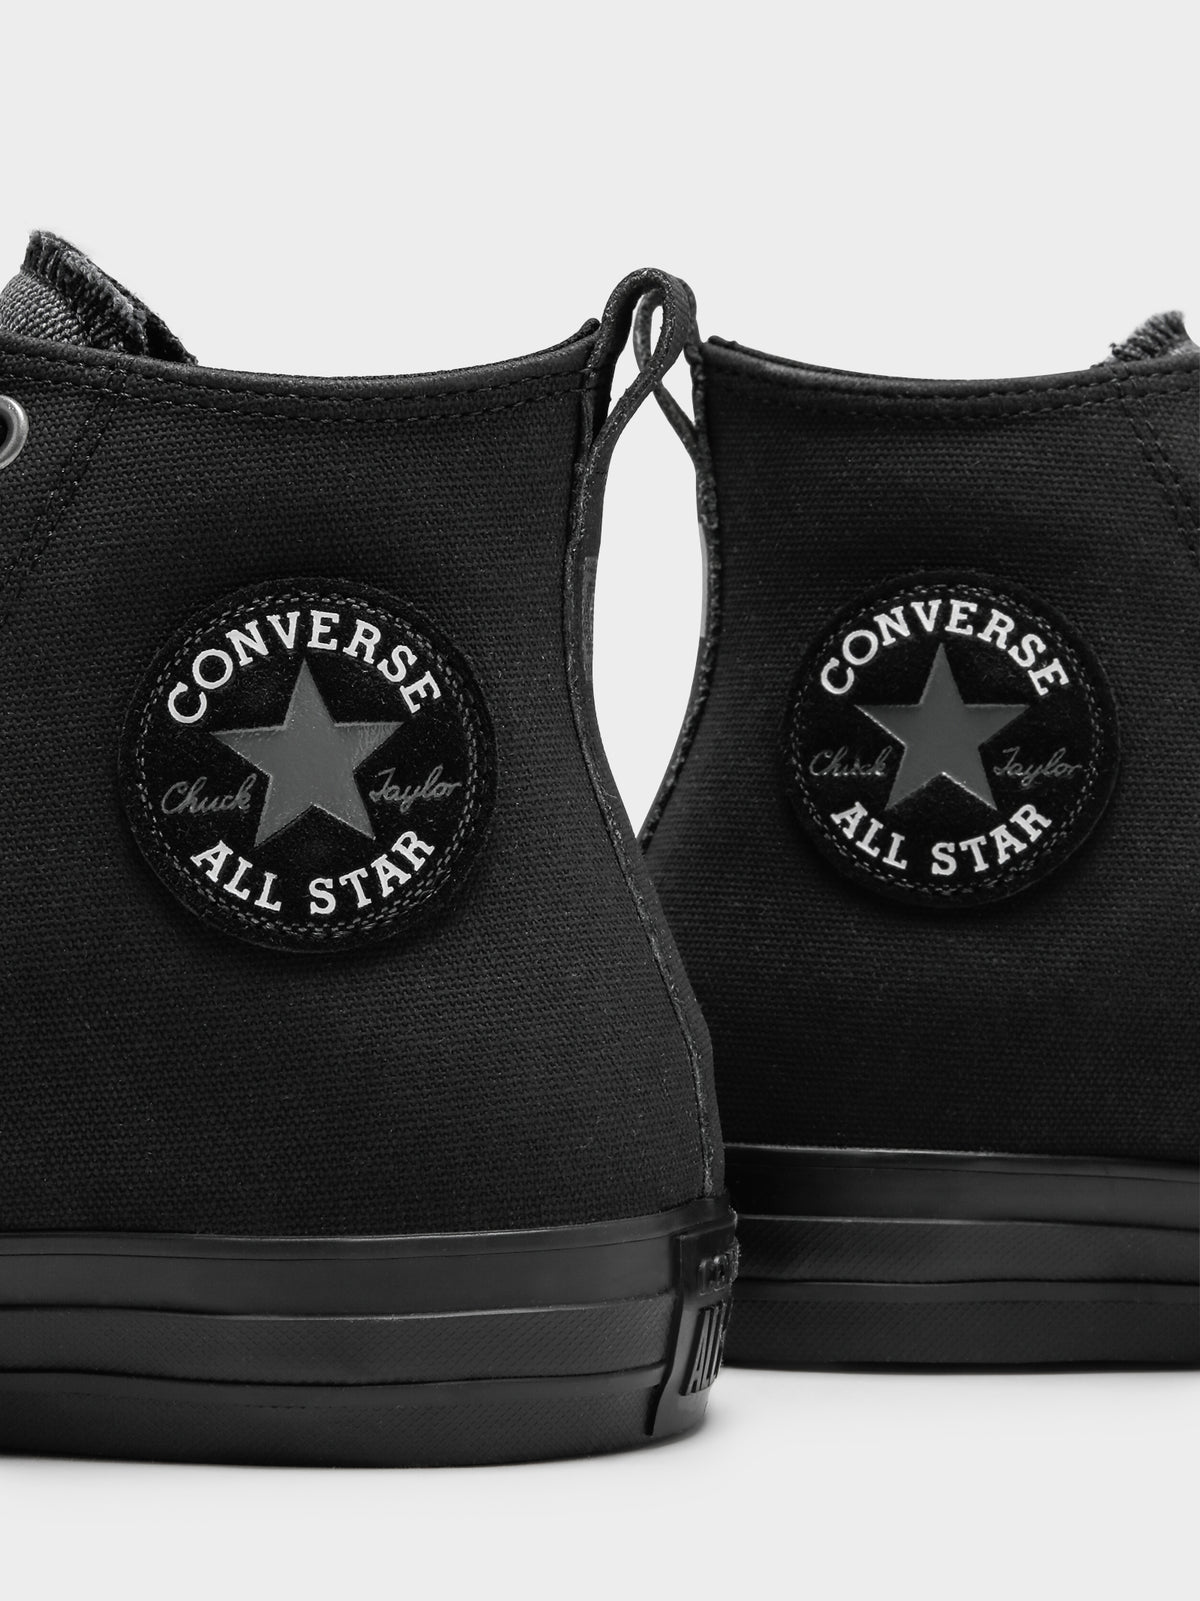 Unisex Converse Chuck Taylor All Star Tec-Tuff Water Resistant High Top in Black